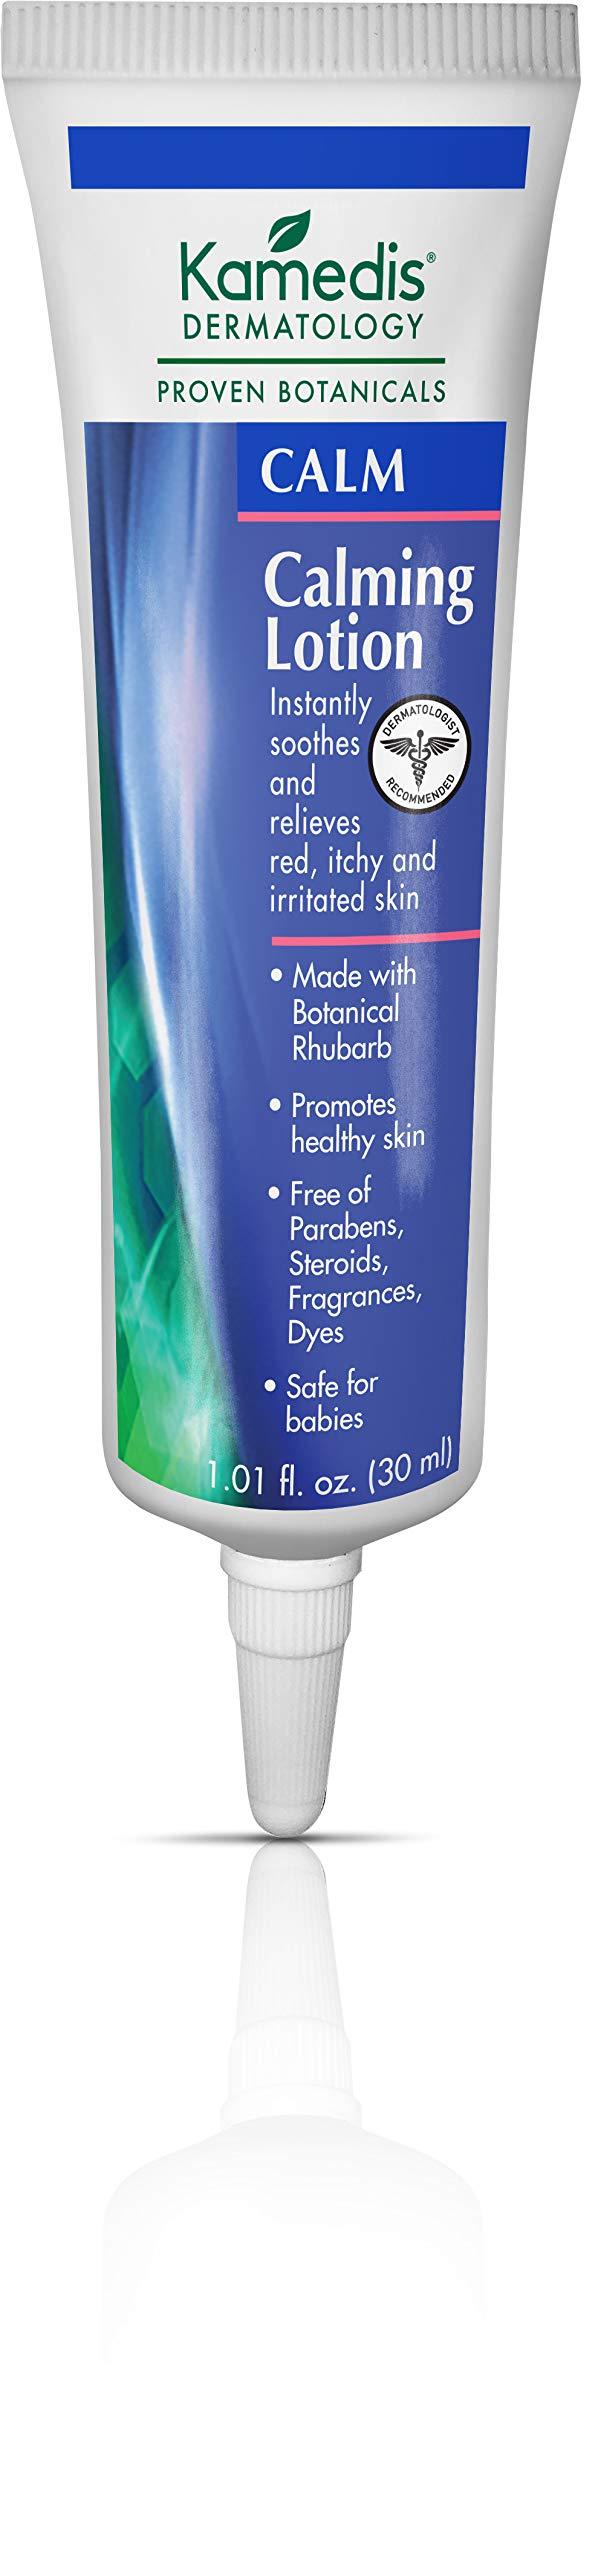 Kamedis Calming Lotion for Sensitive Skin, Soothing Treatment with Proven Botanicals for Relief of Dry, Itchy, & Irritated Skin, Steroid-Free, Safe for Babies, Made in USA. 1.01 Fl Oz - BeesActive Australia